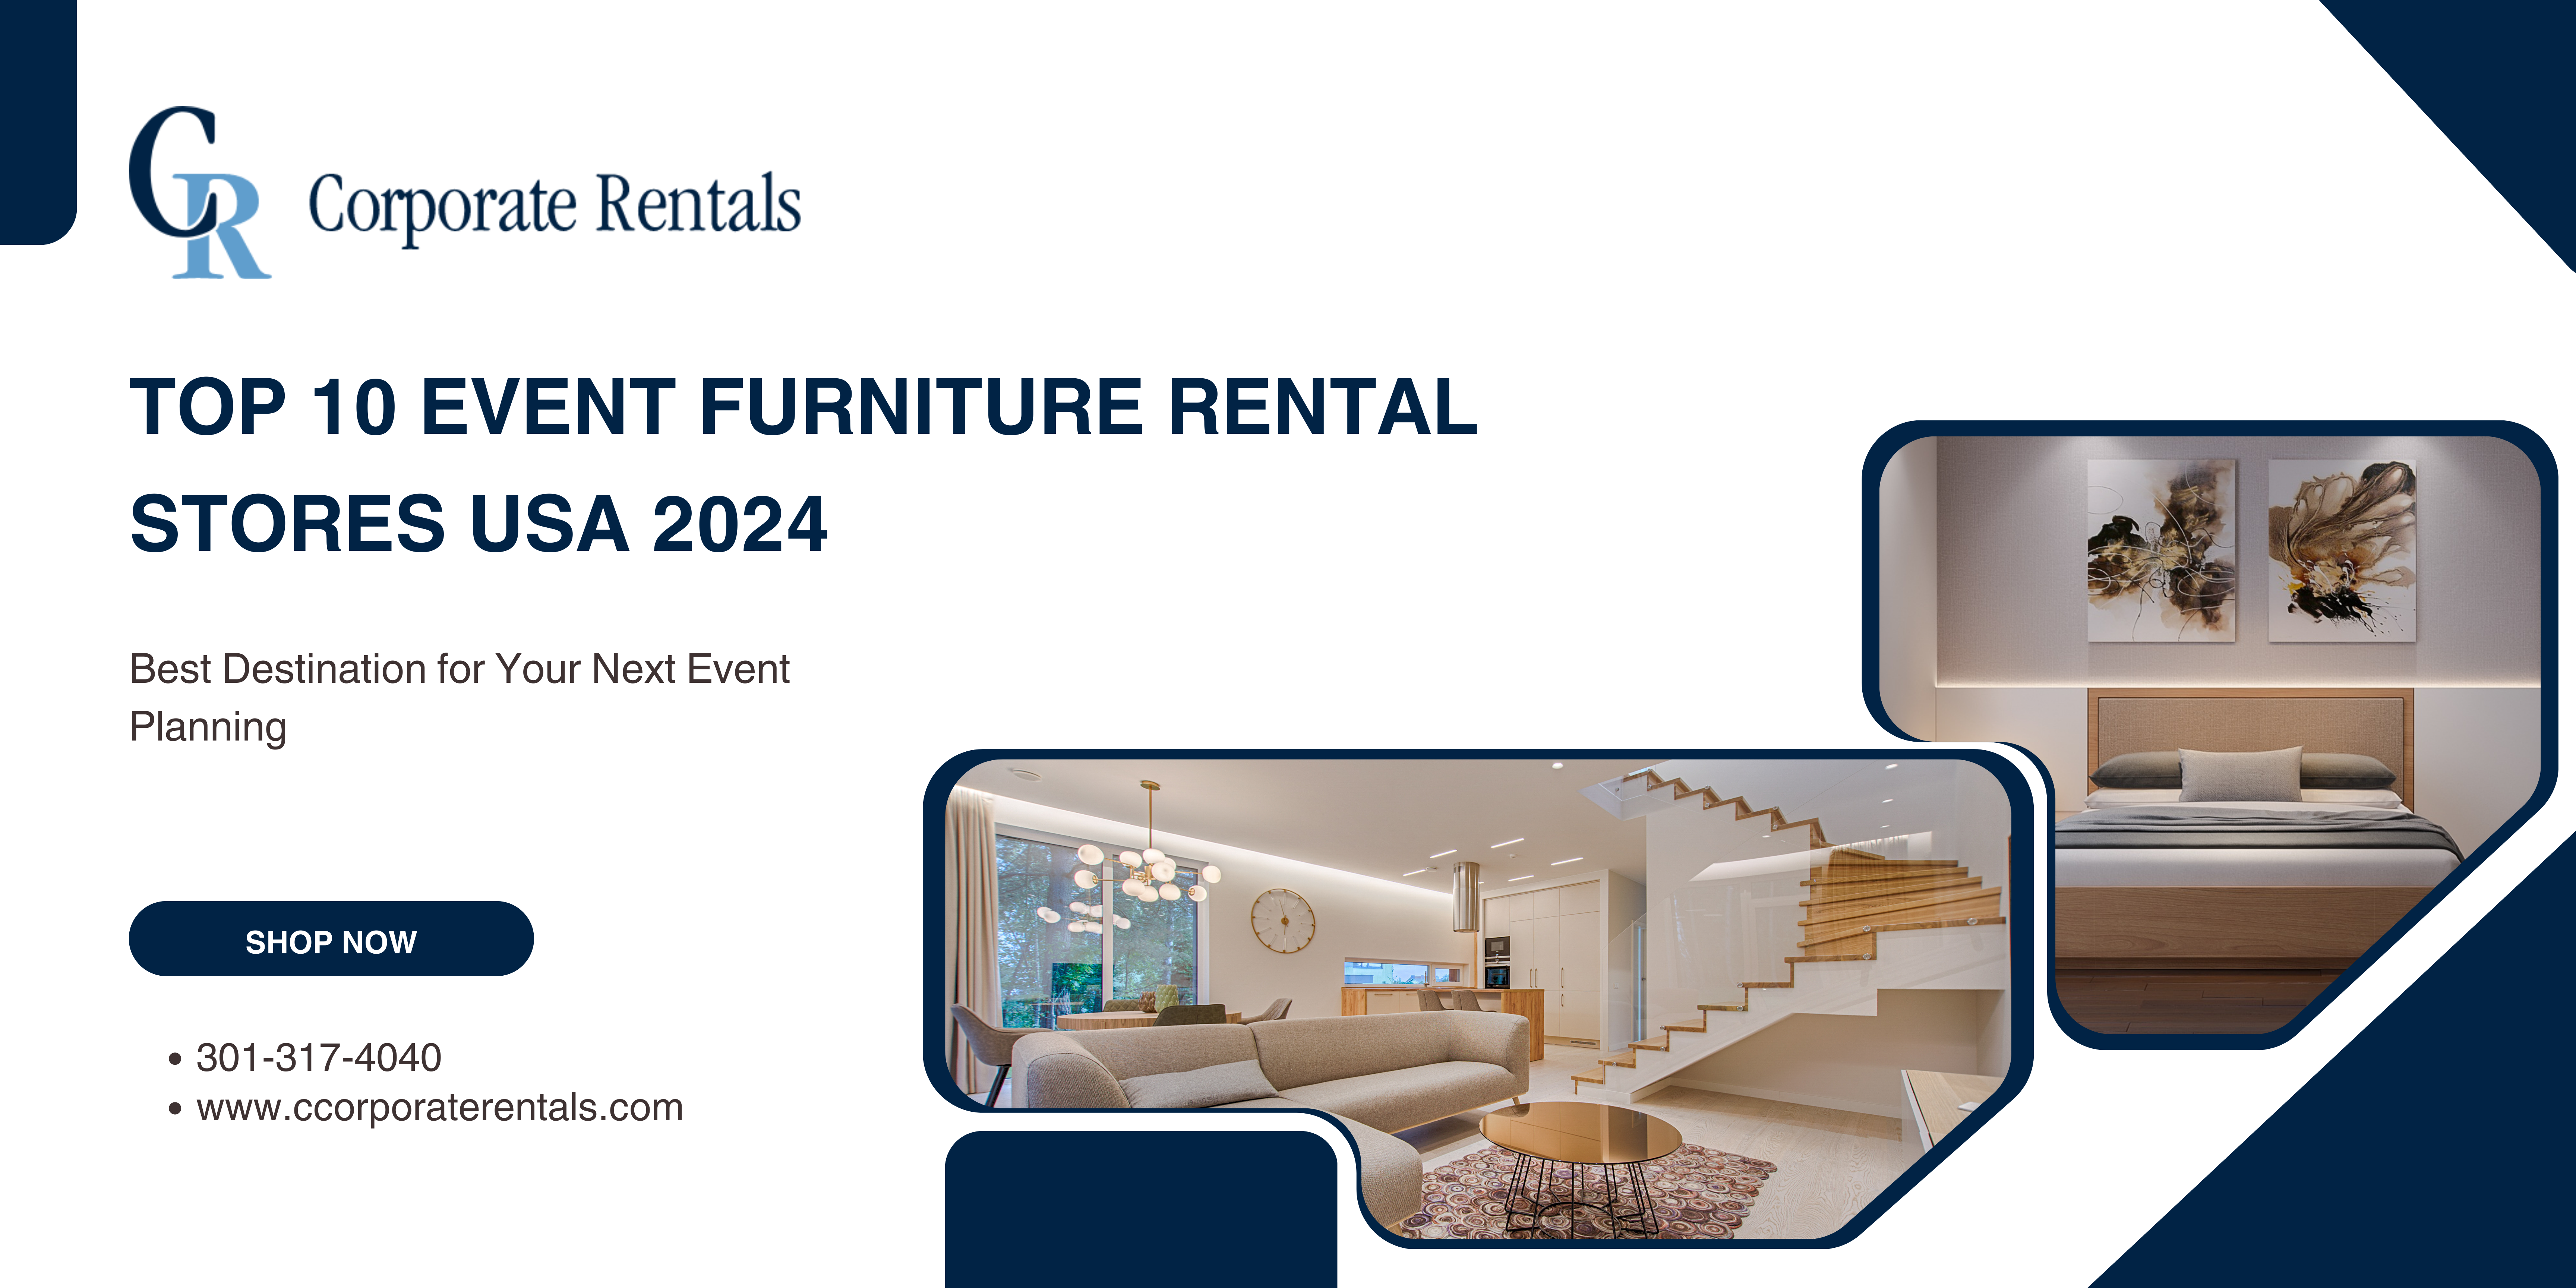 Top 10 Event Furniture Rental Stores USA 2024